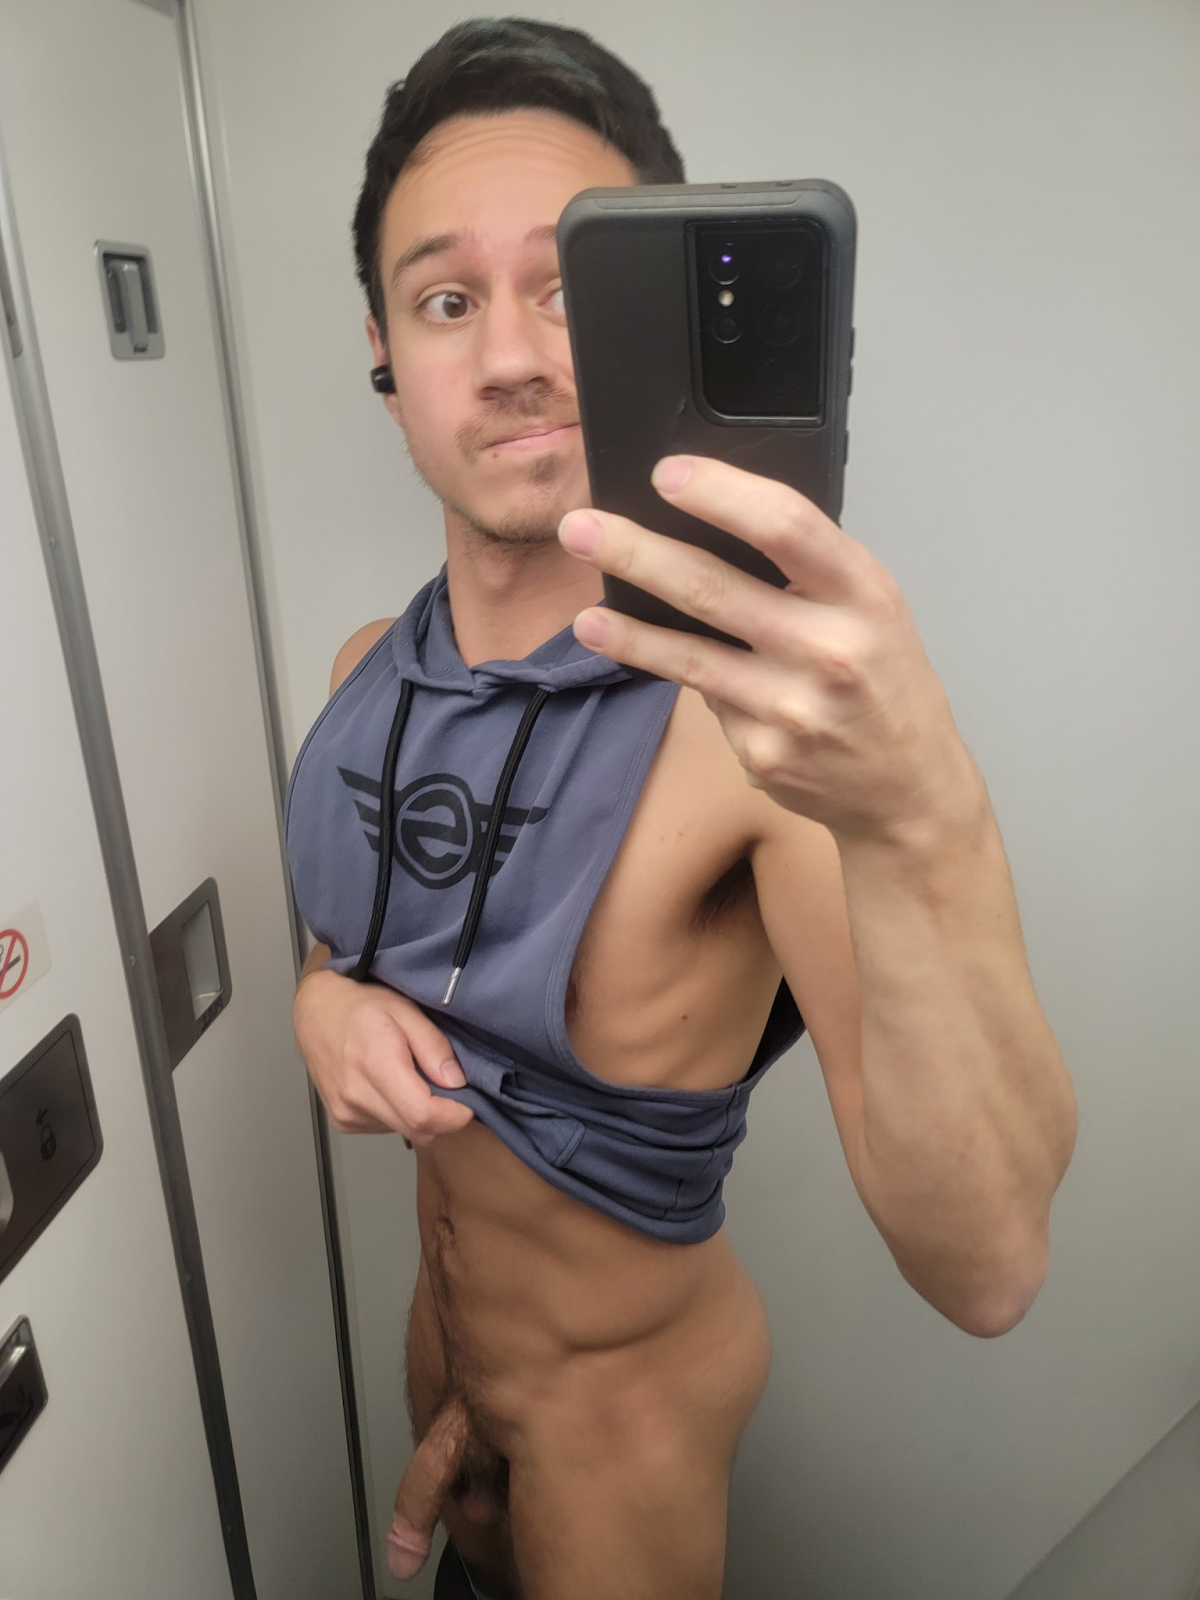 Dakota Wonders taking a pantless selfie in the airplane bathroom lifting up his sleeveless workout hoodie and showing off his flaccid penis